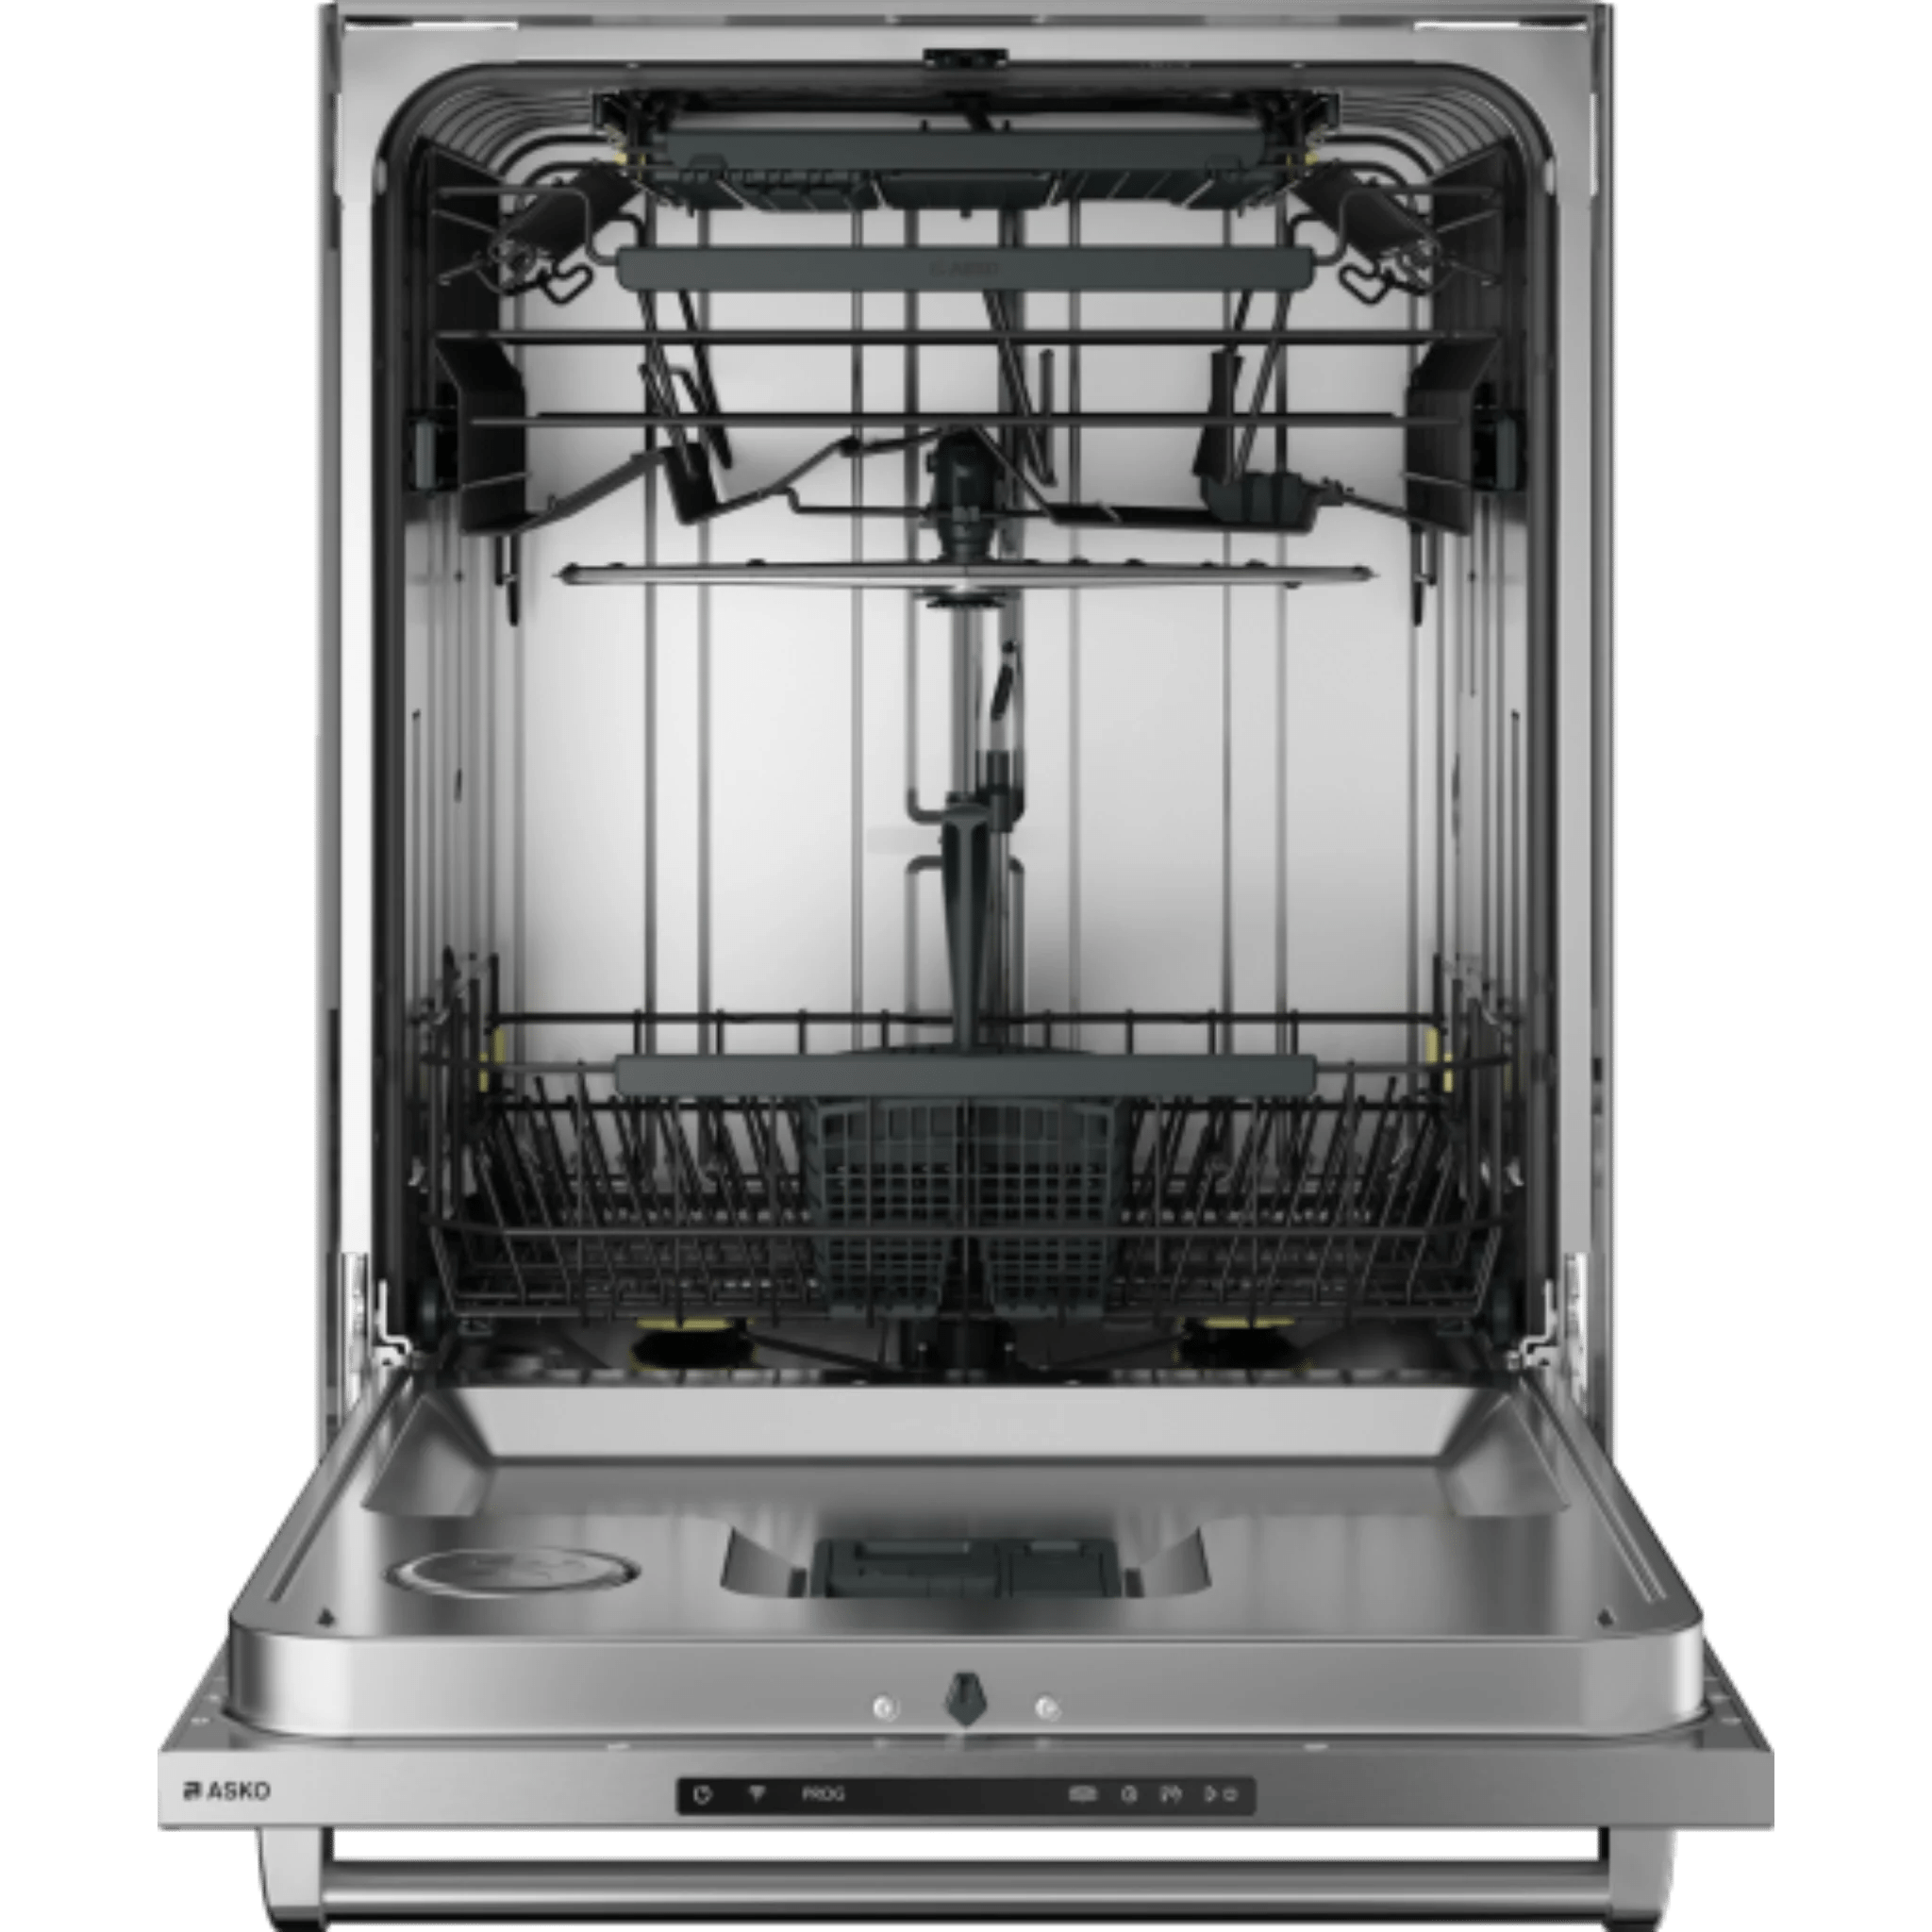 Asko Logic 24 Inch Wide 16 Place Setting Built-In Top Control Dishwasher with Pro Handle, Turbo Combi Drying™, and Auto Door Open Drying™ Dishwashers DBI564PHS Luxury Appliances Direct